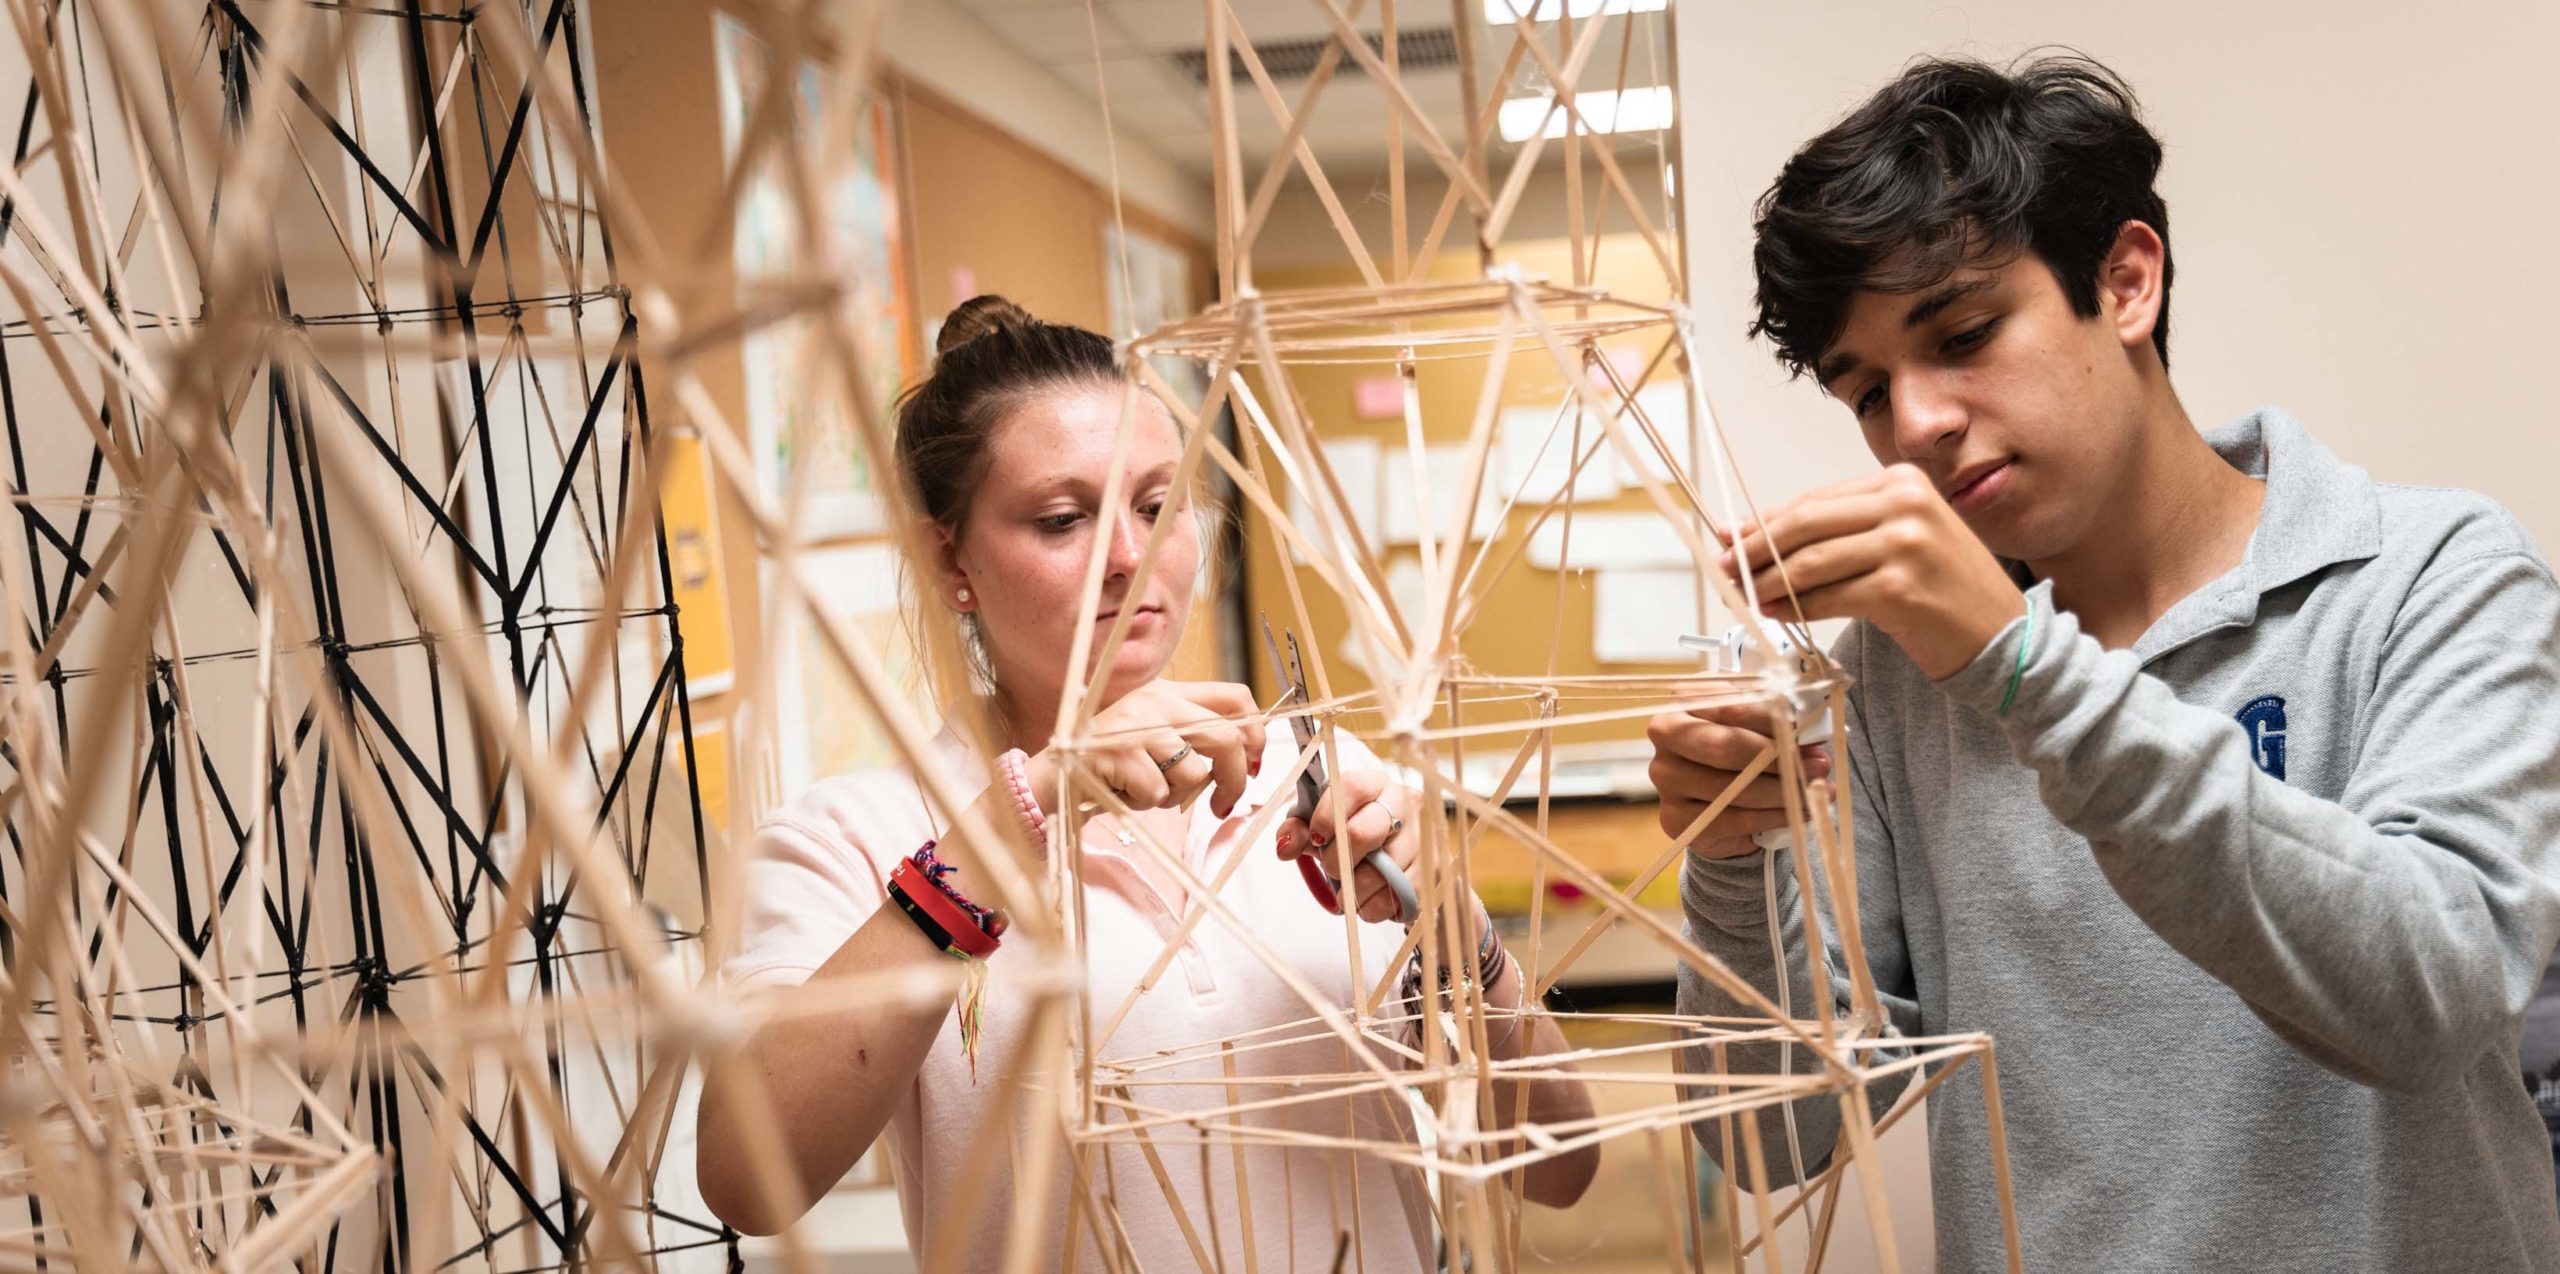 Two students building structures in architecture class